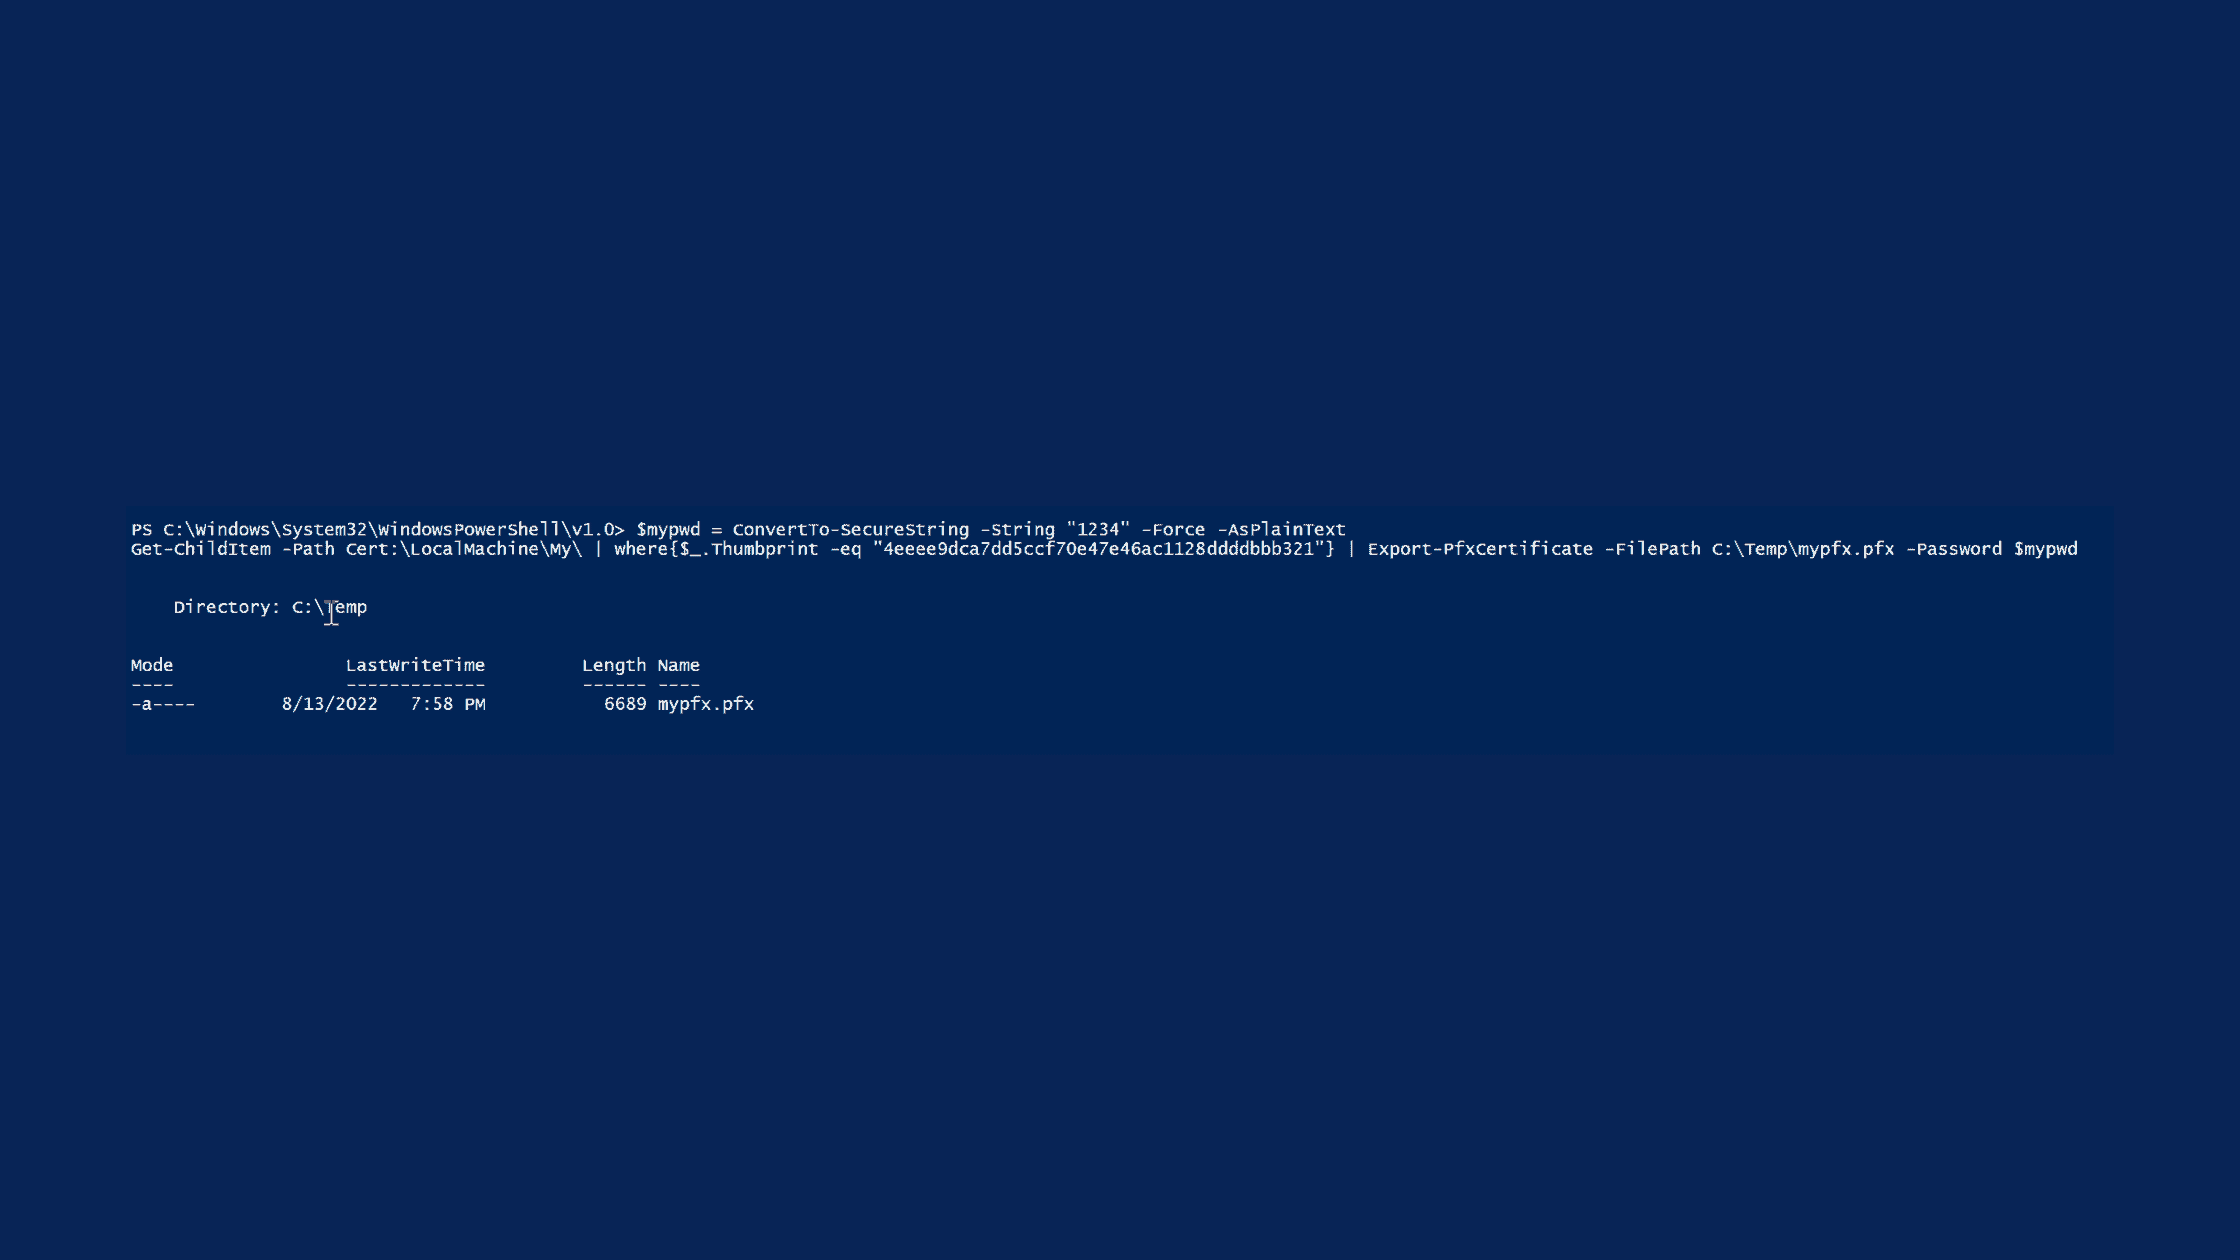 How To Export A Certificate From Powershell